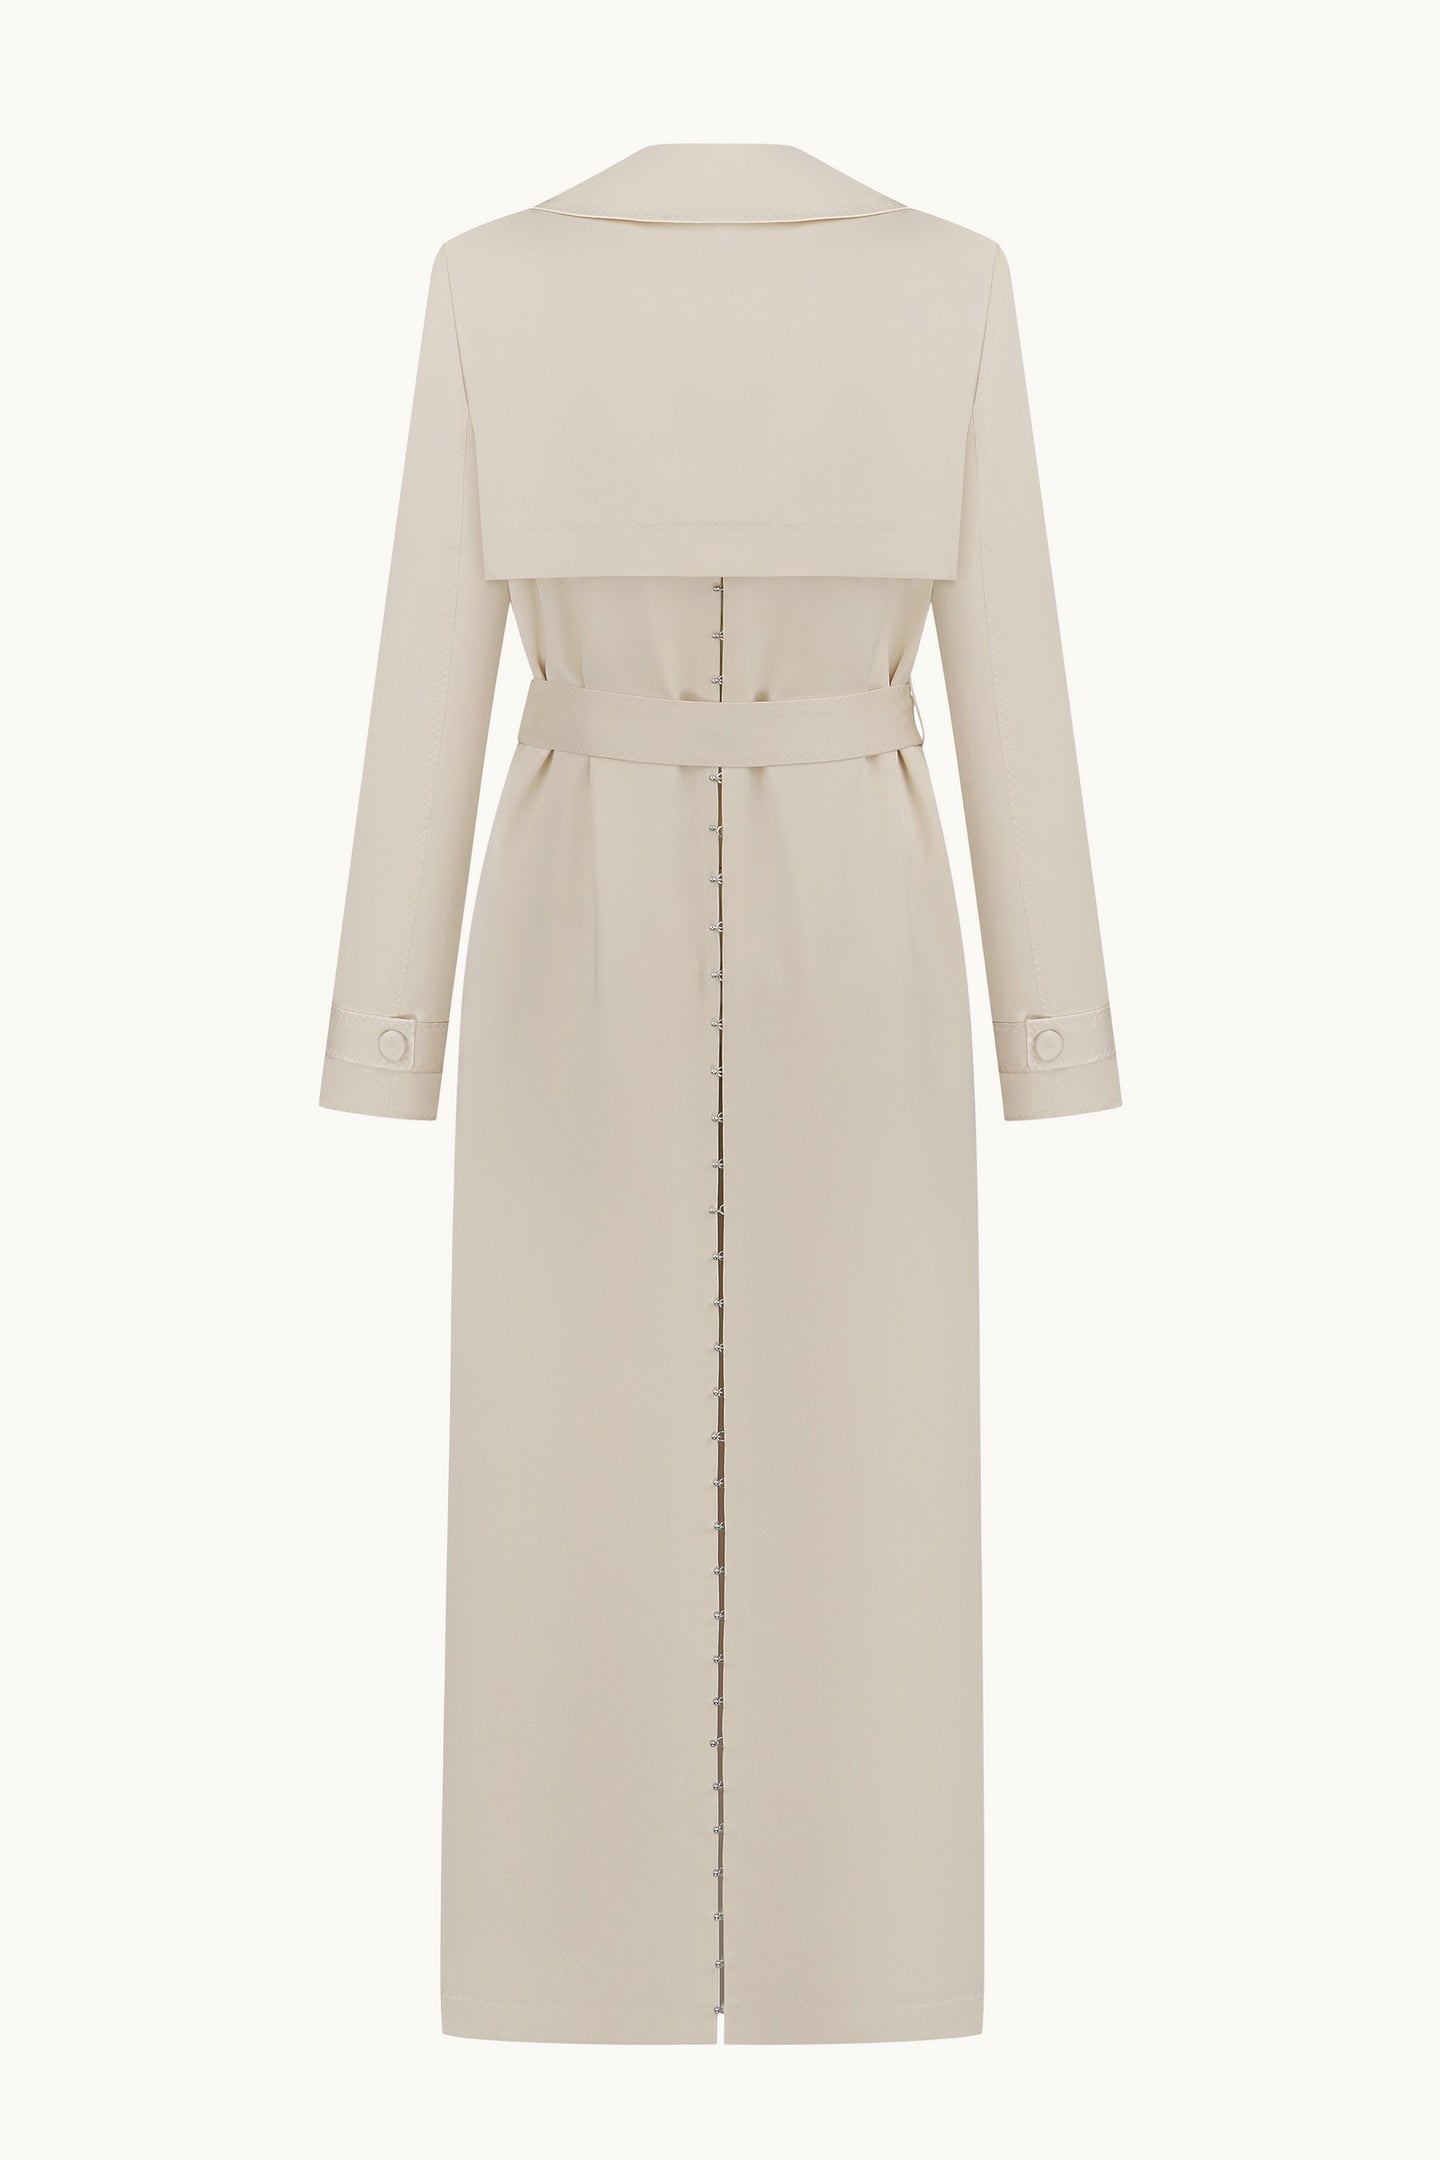 Nomy ivory trench back view